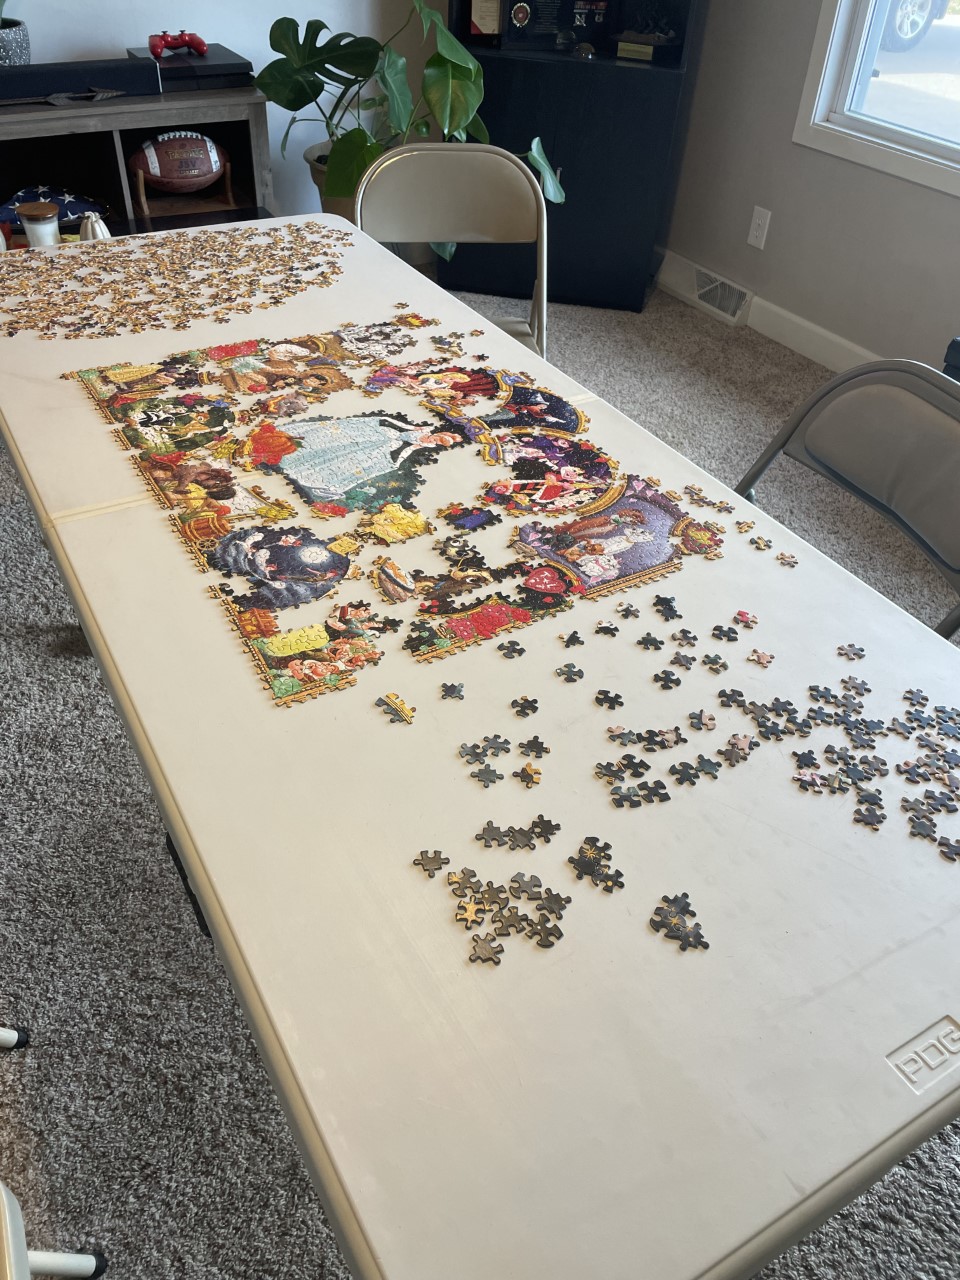 this is a photo of me doing a puzzle